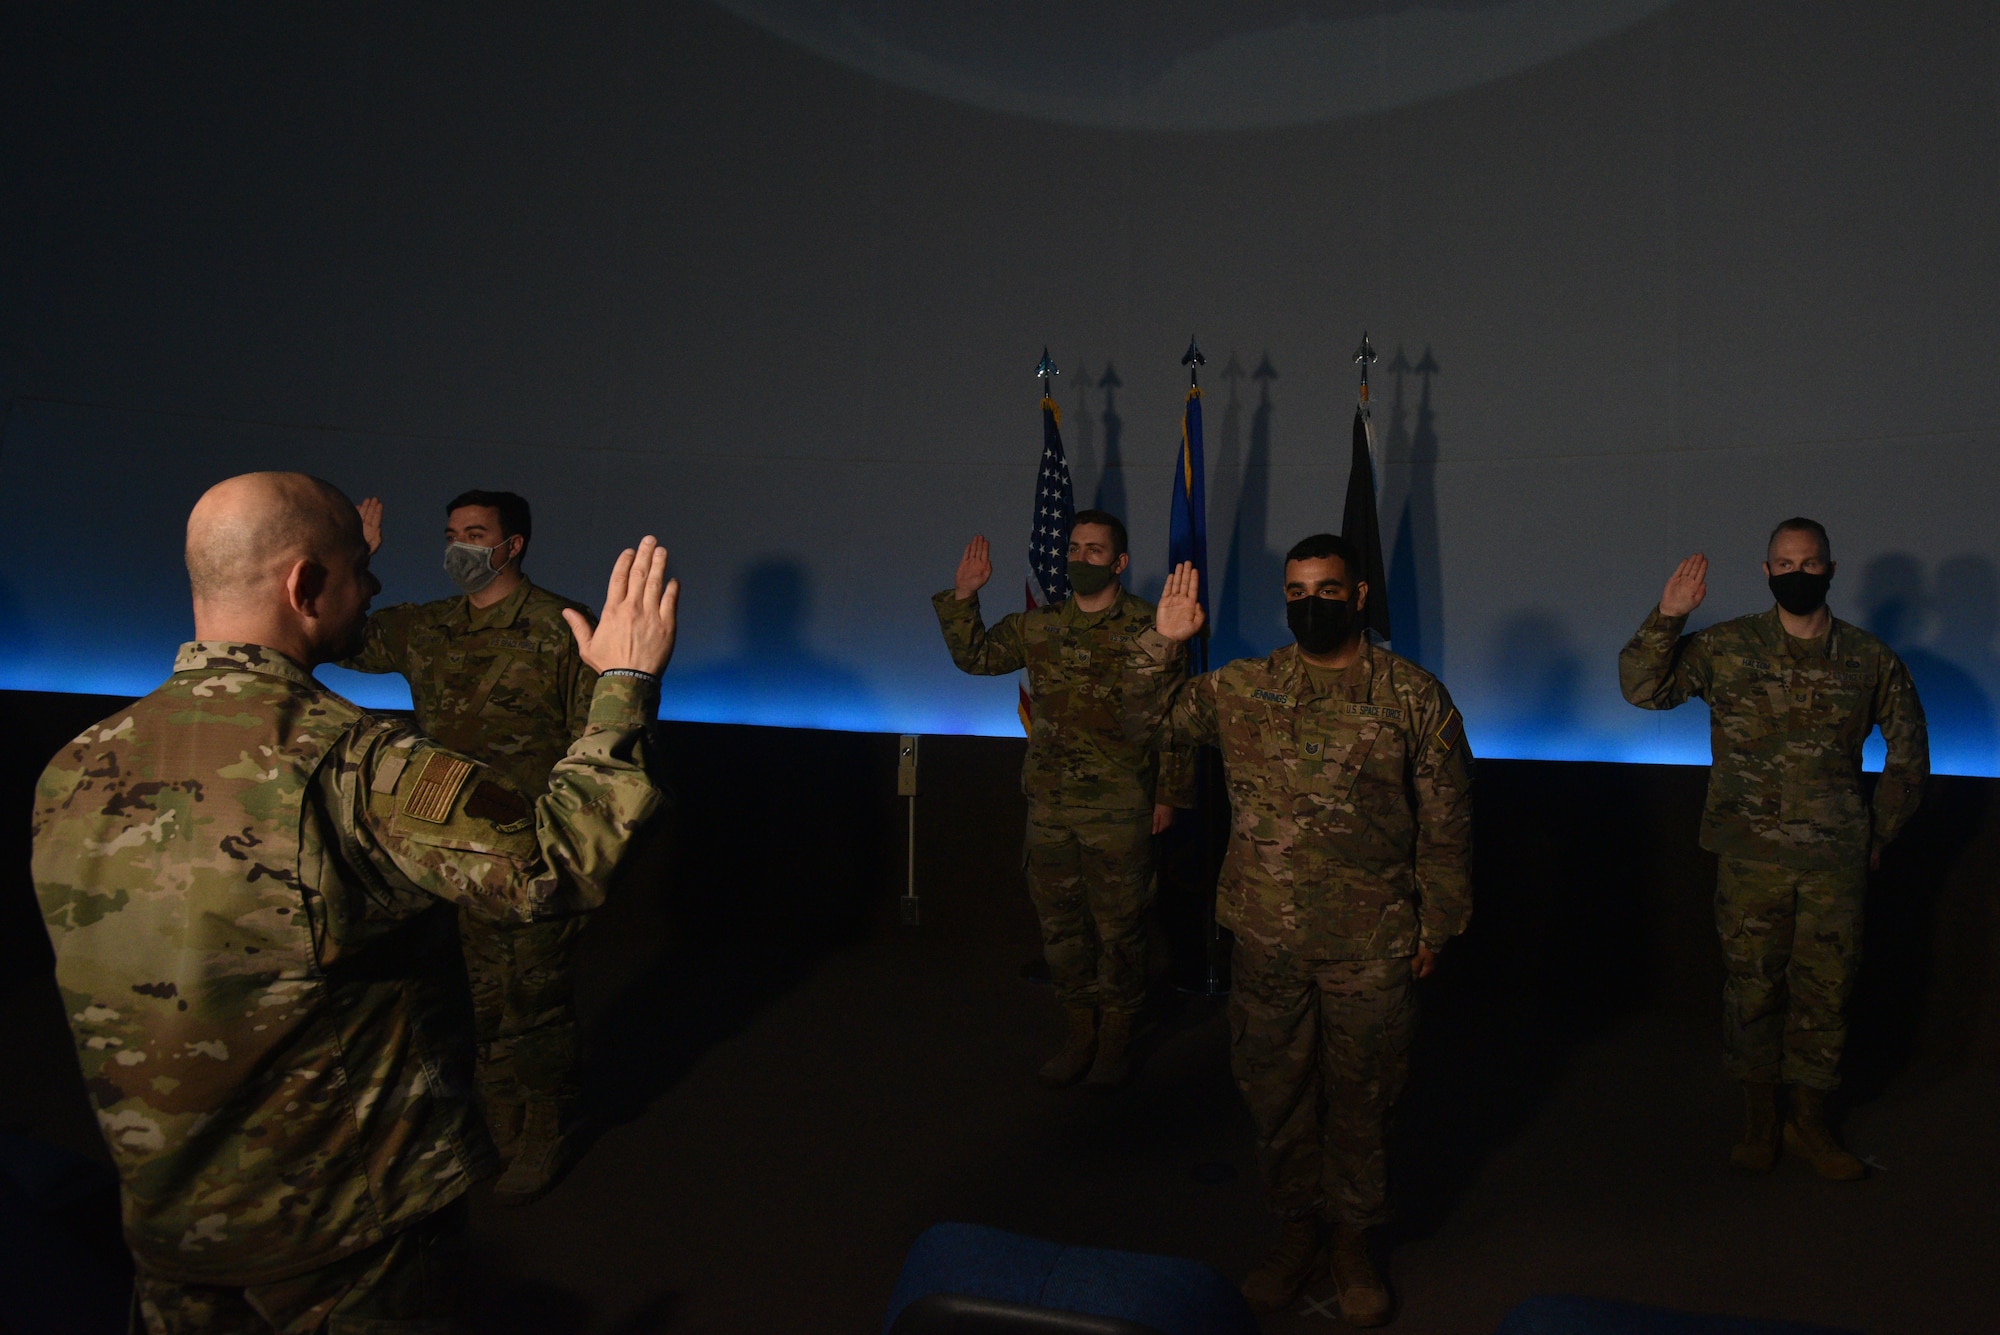 U.S. Air Force Col. Andres Nazario, 17th Training Wing commander, administers the oath of enlistment to the Space Force’s newest Guardians at Angelo State University’s Planetarium in San Angelo, Texas, March 26, 2021. Since December 20, 2019, the Space Force continues to train and equip Guardians to protect and defend our nation.  (U.S. Air Force photo by Senior Airman Ashley Thrash)